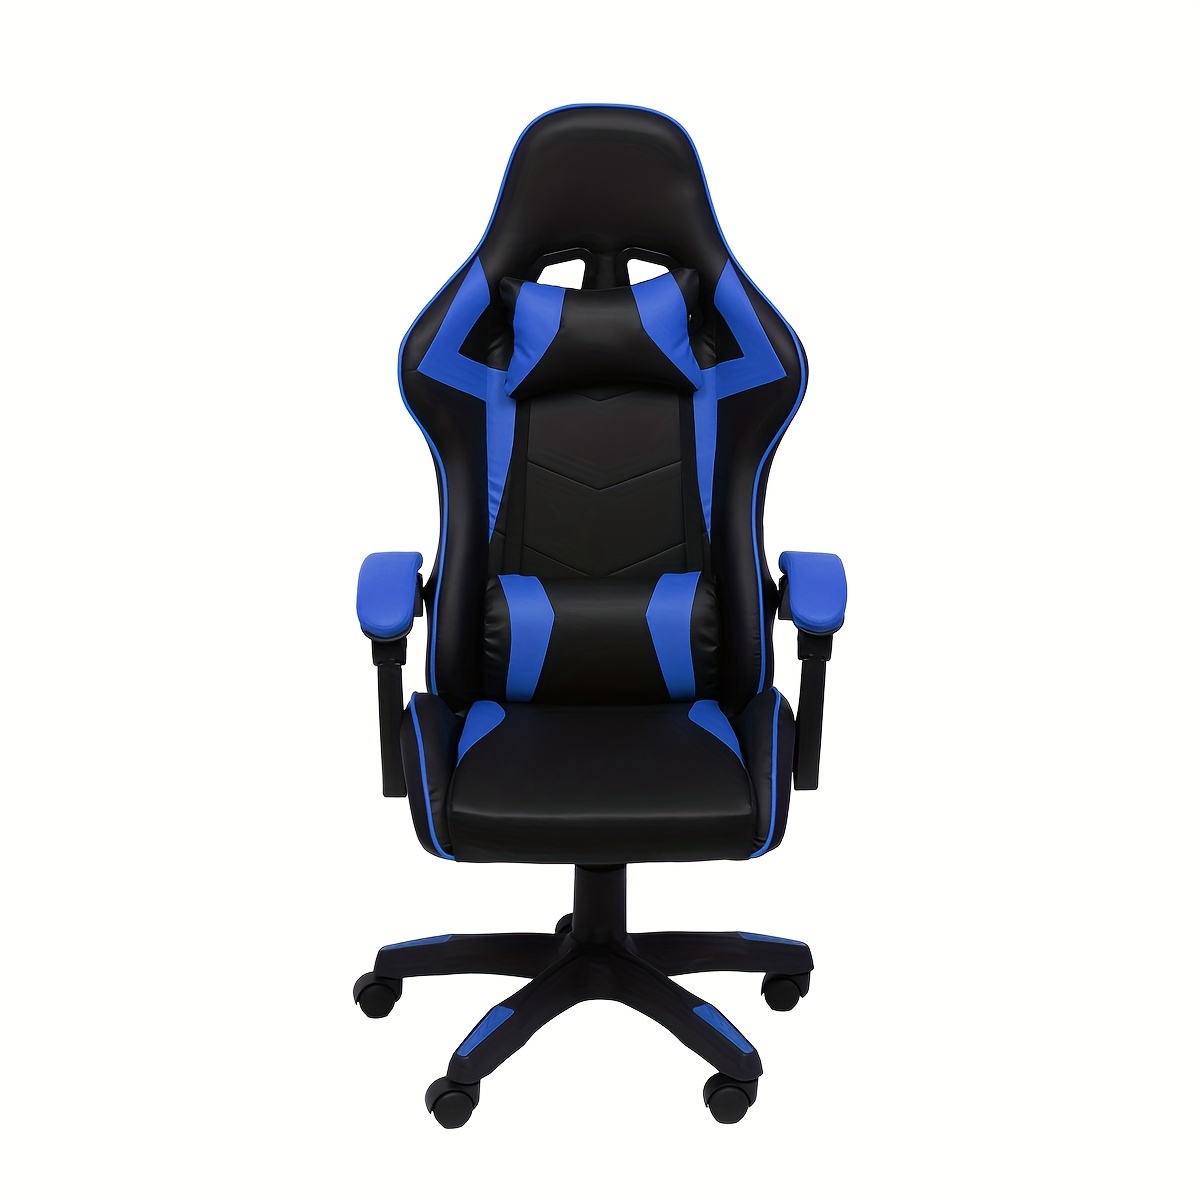 High Quality Adjustable Recliner Computer Gaming Sofa Chairs